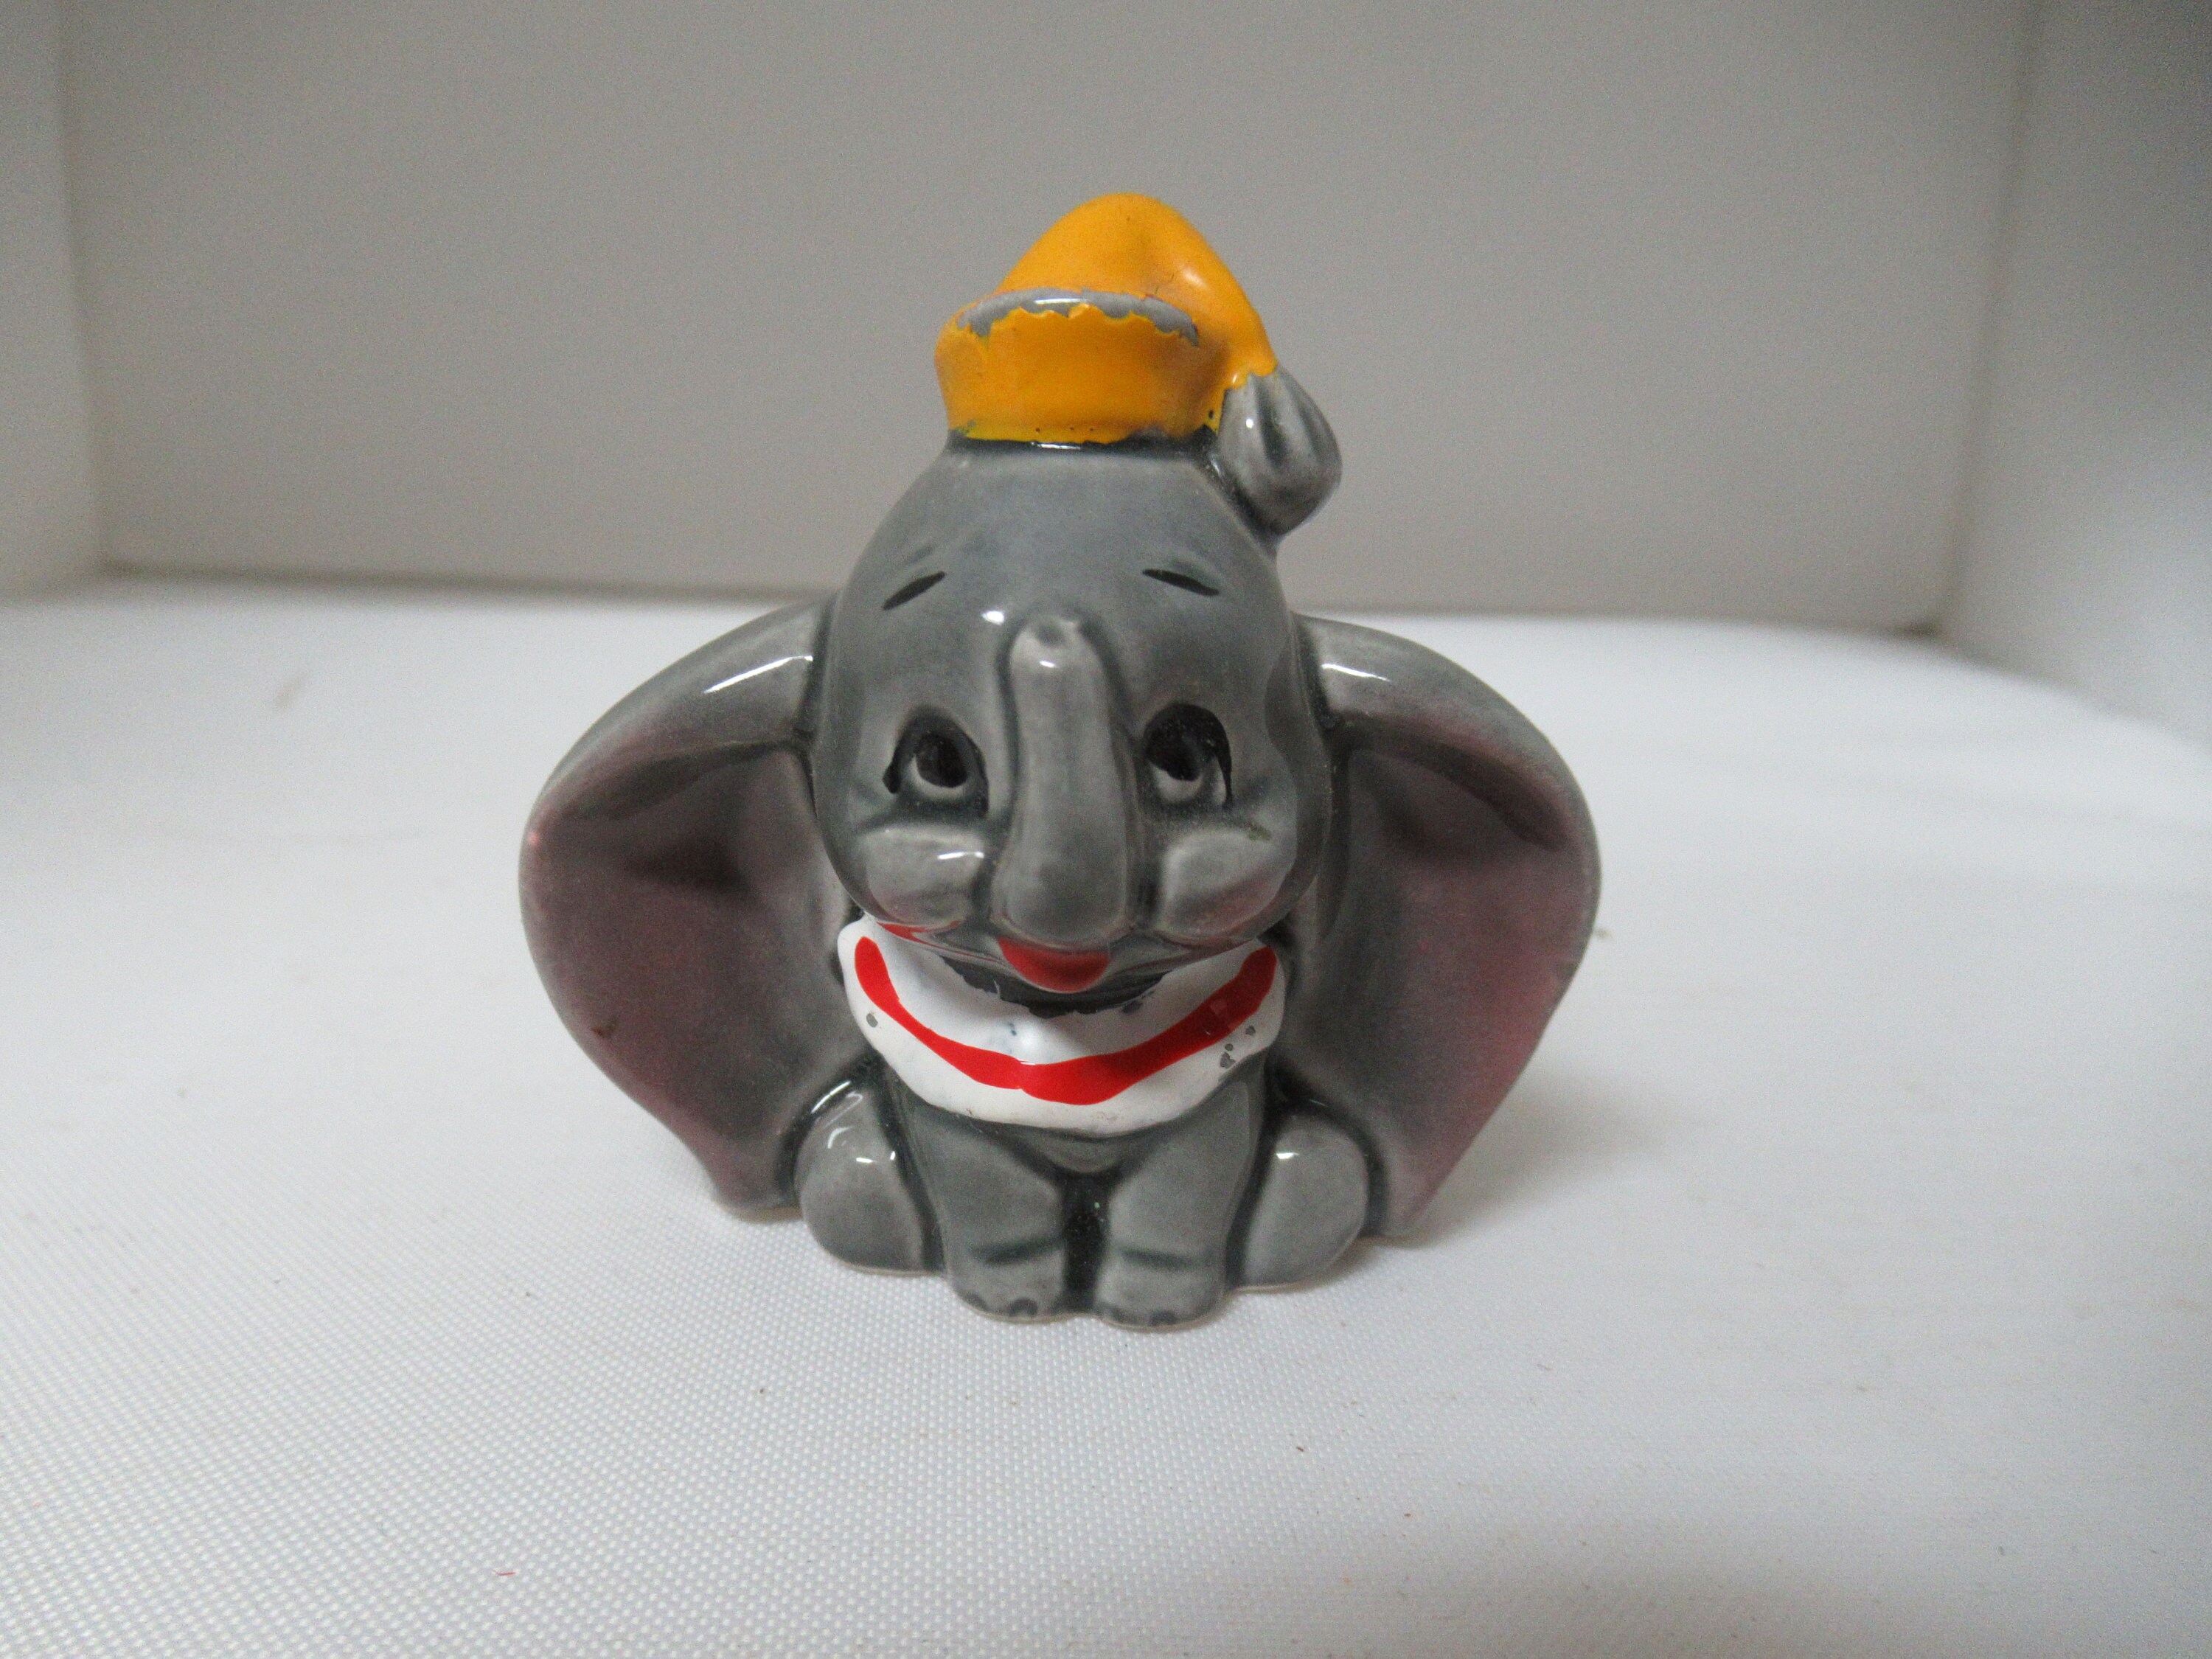 1941 Dumbo Timothy Mouse Ceramic Figurine by Vernon Kilns - ID